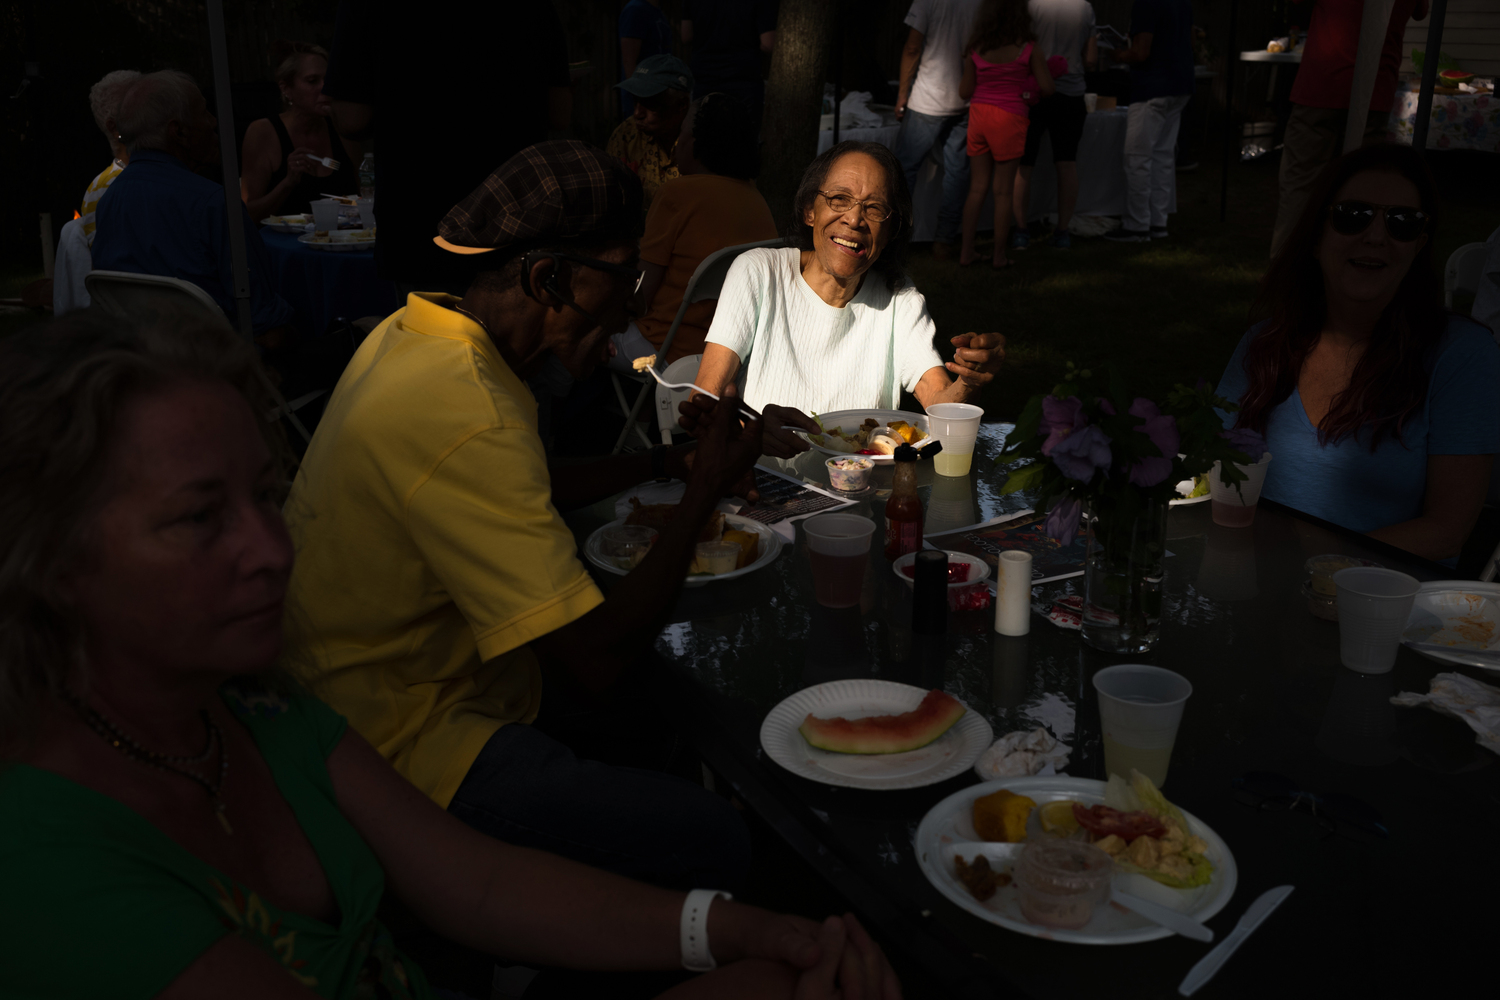 Kathy Tucker, a founding member of the Eastville Community Historical Society, at the organization's annual fish fry fundraiser in 2018. LORI HAWKINS